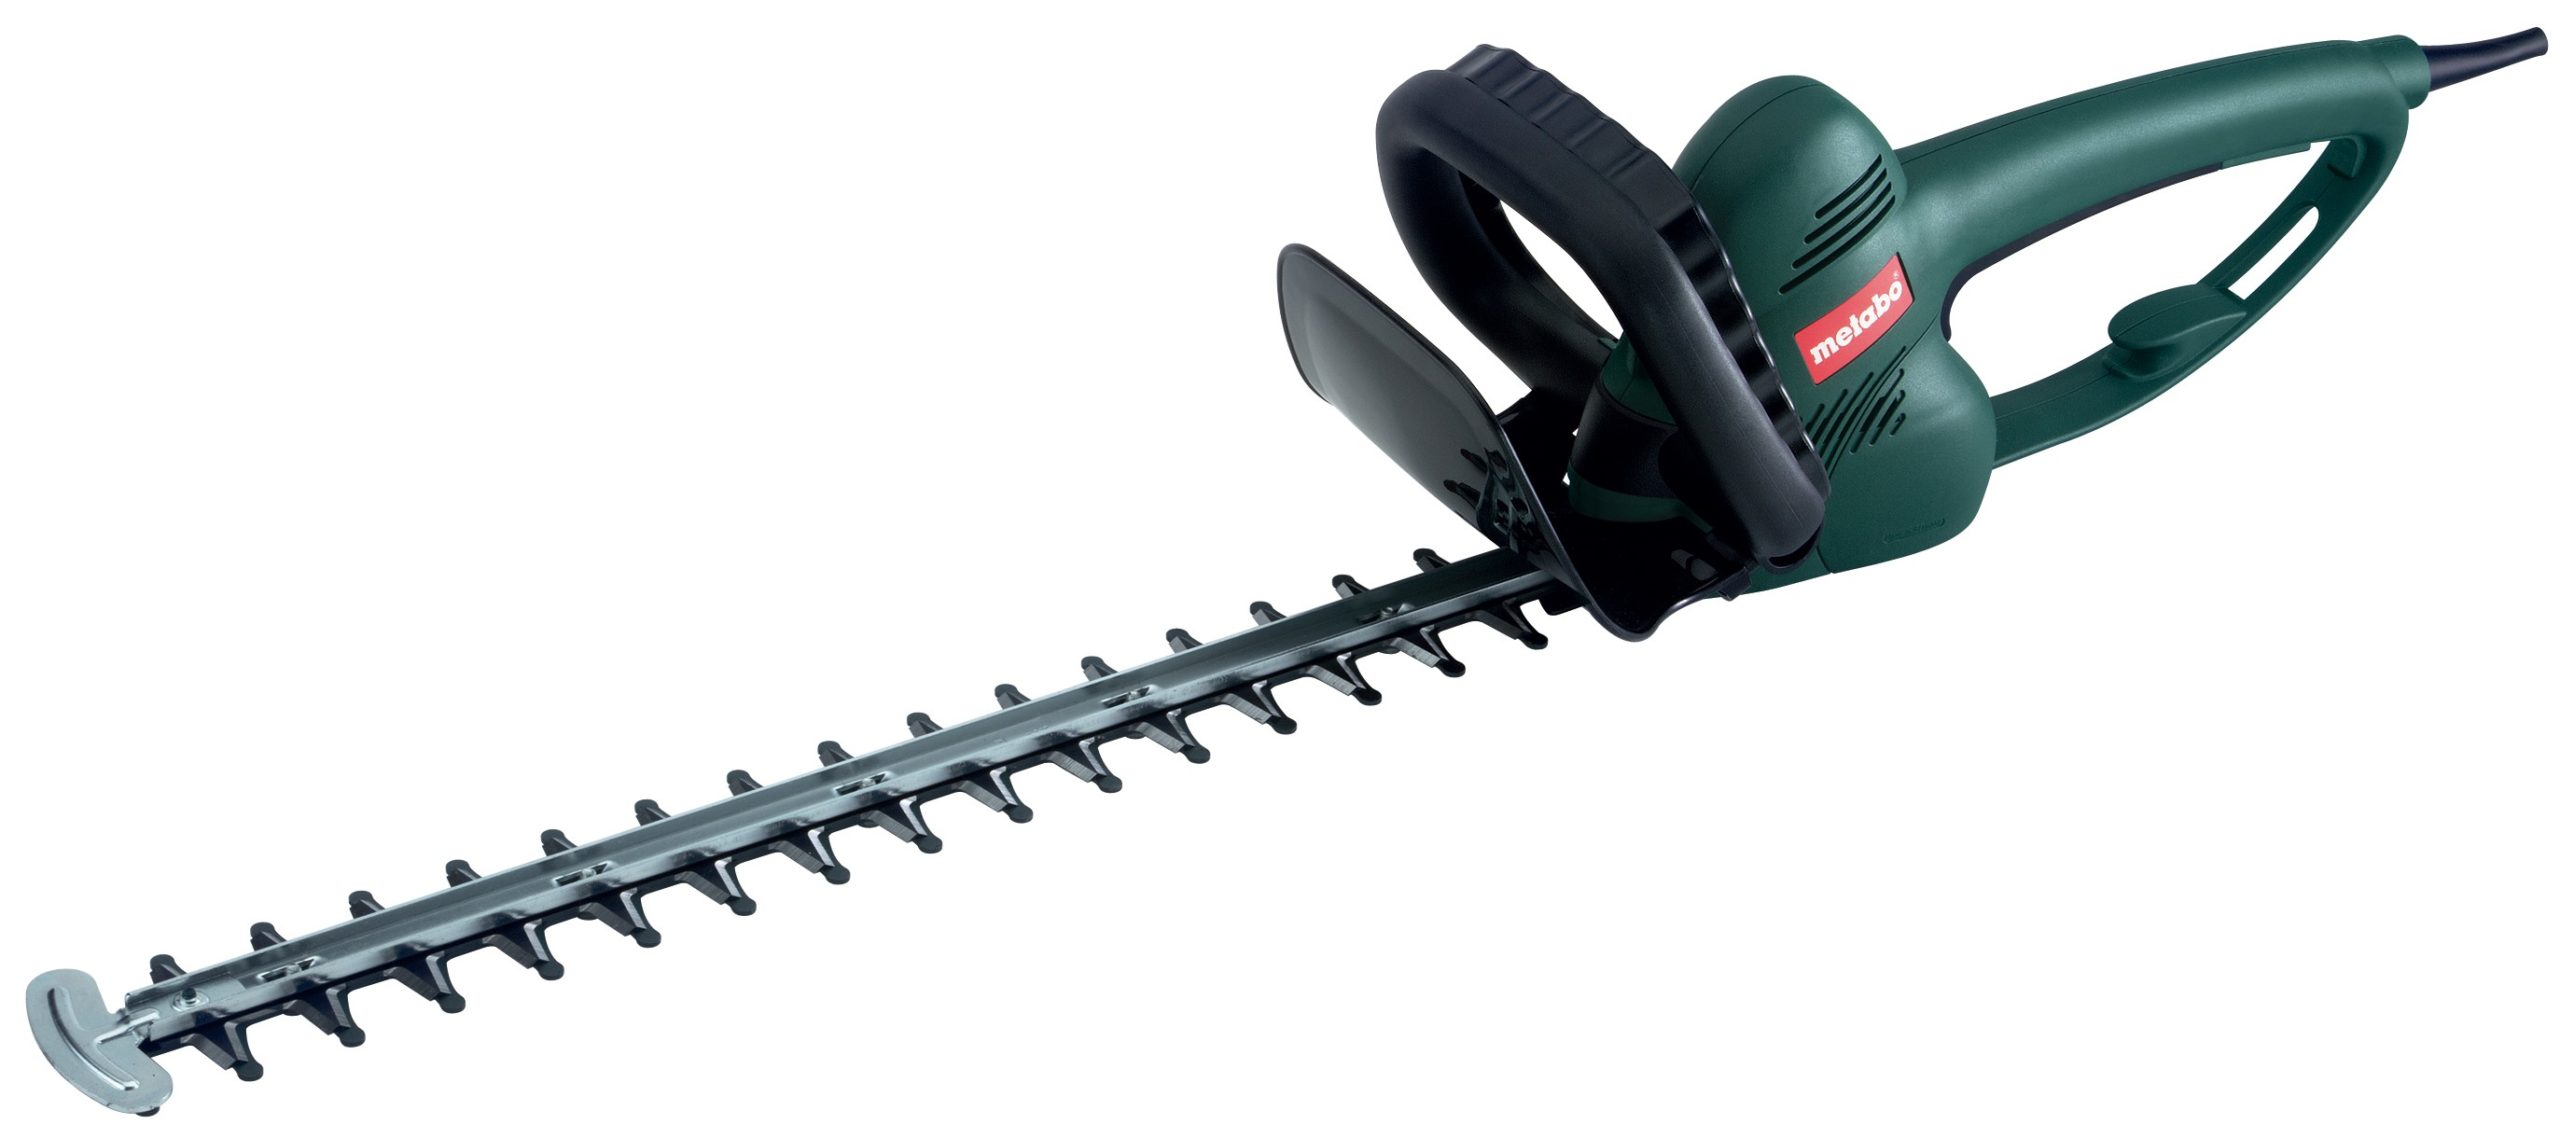 METABO TAILLE-HAIES 450 WATTS HS 55